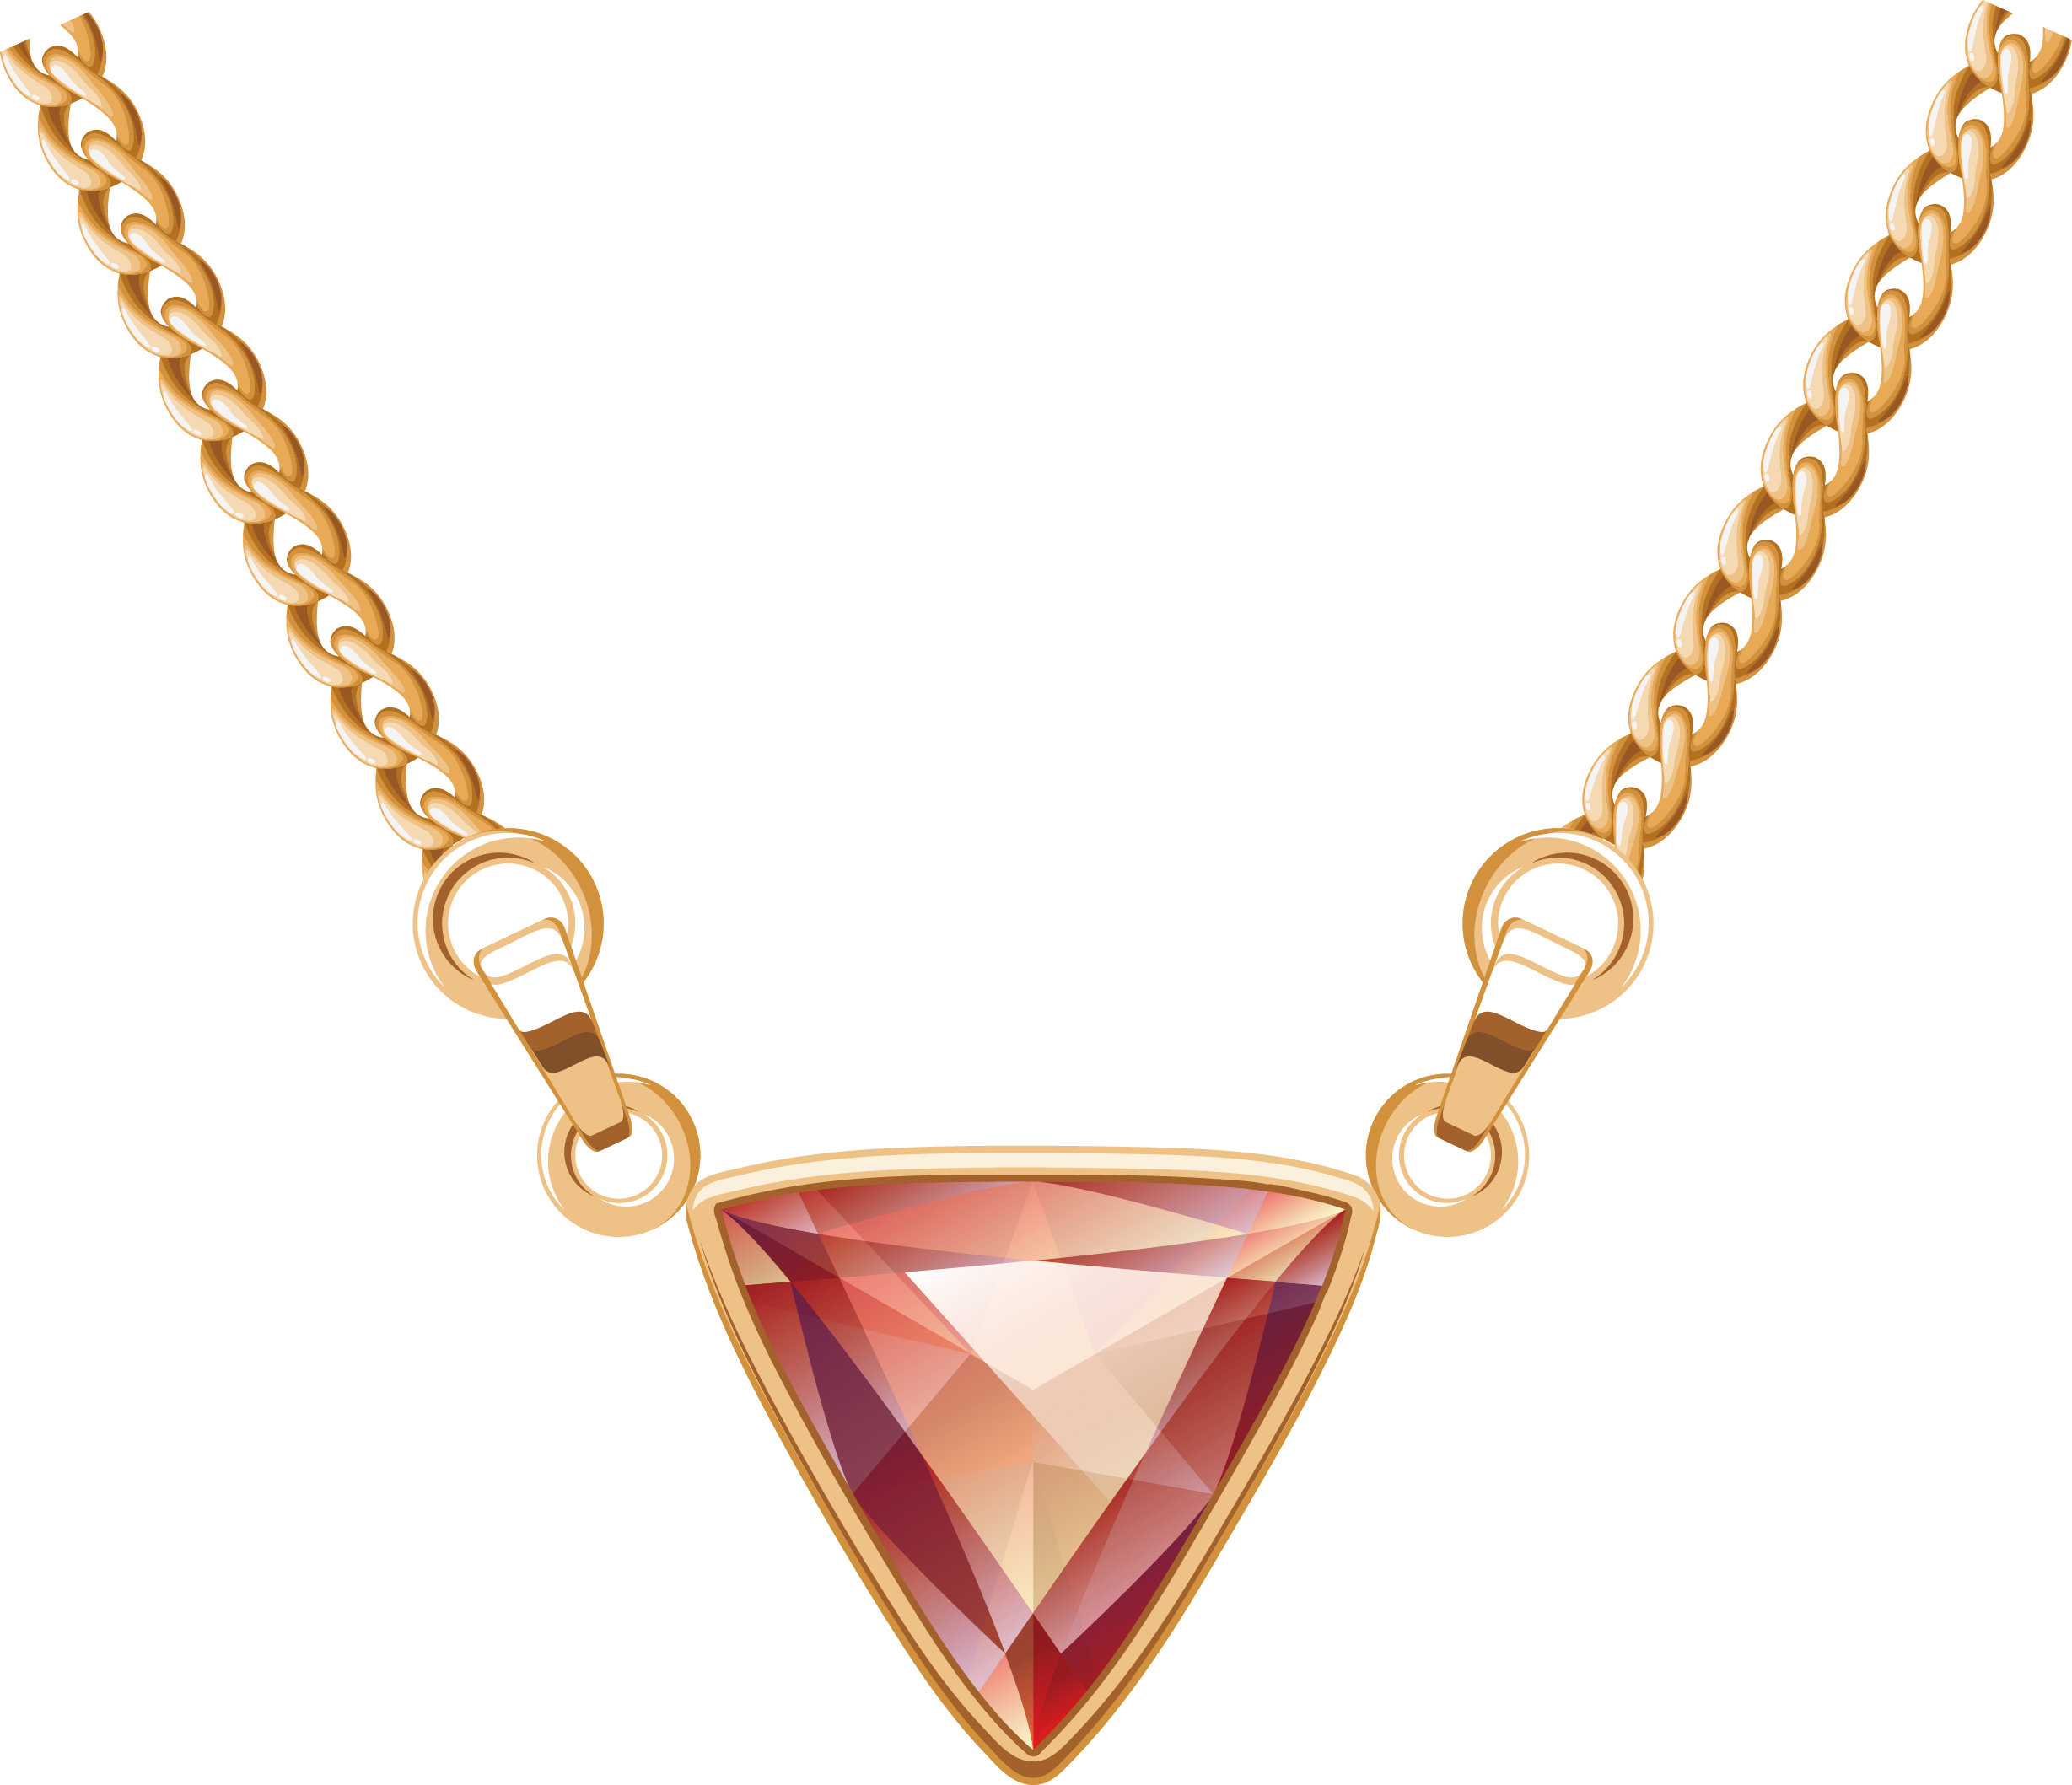 Necklace PNG Images, Jewellers Necklace Designs Pictures - Free ...